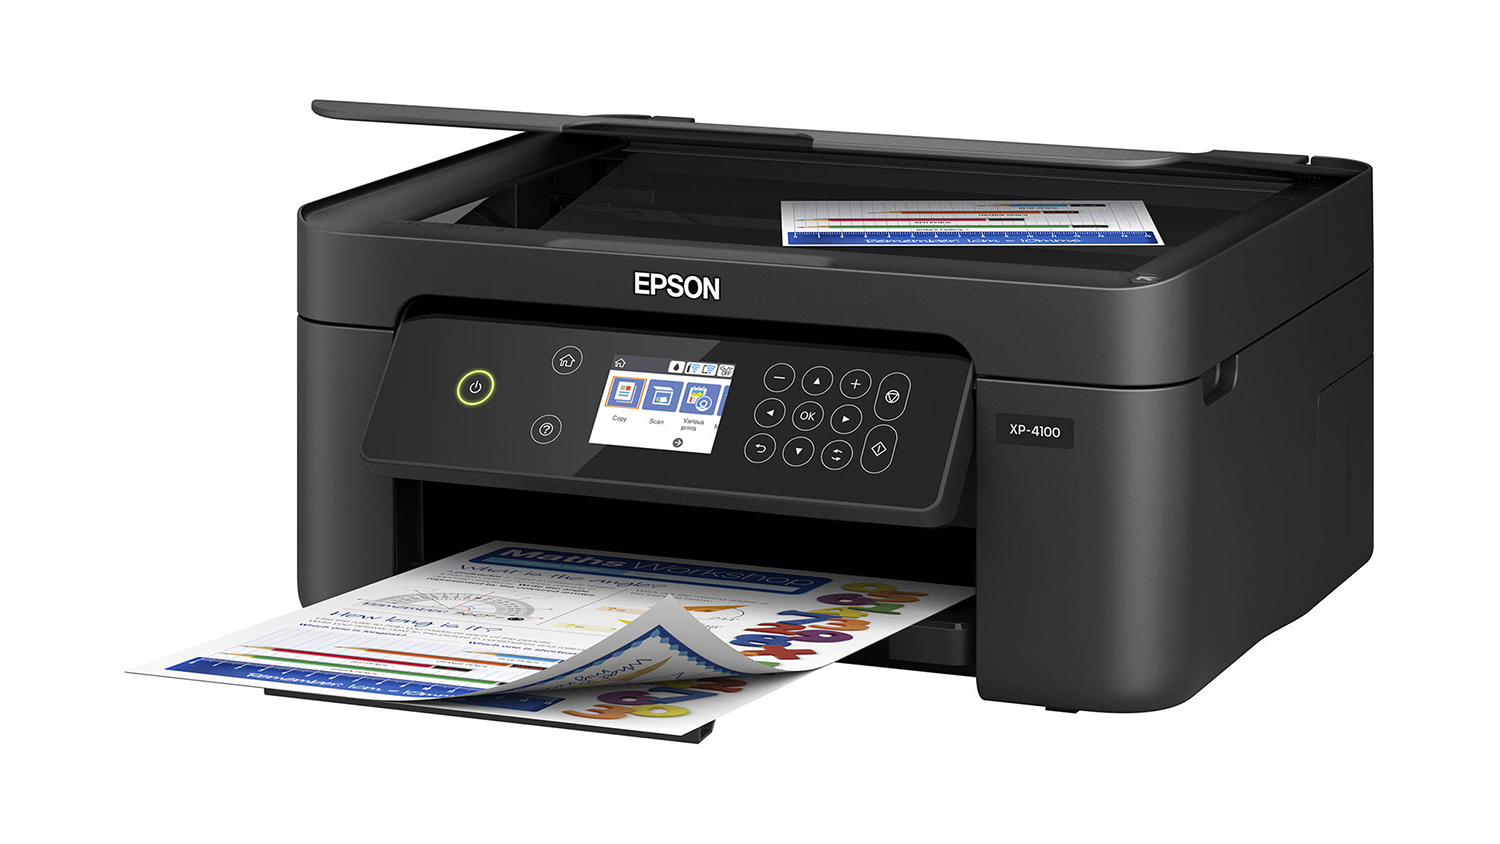 epson event manager download xp 4100